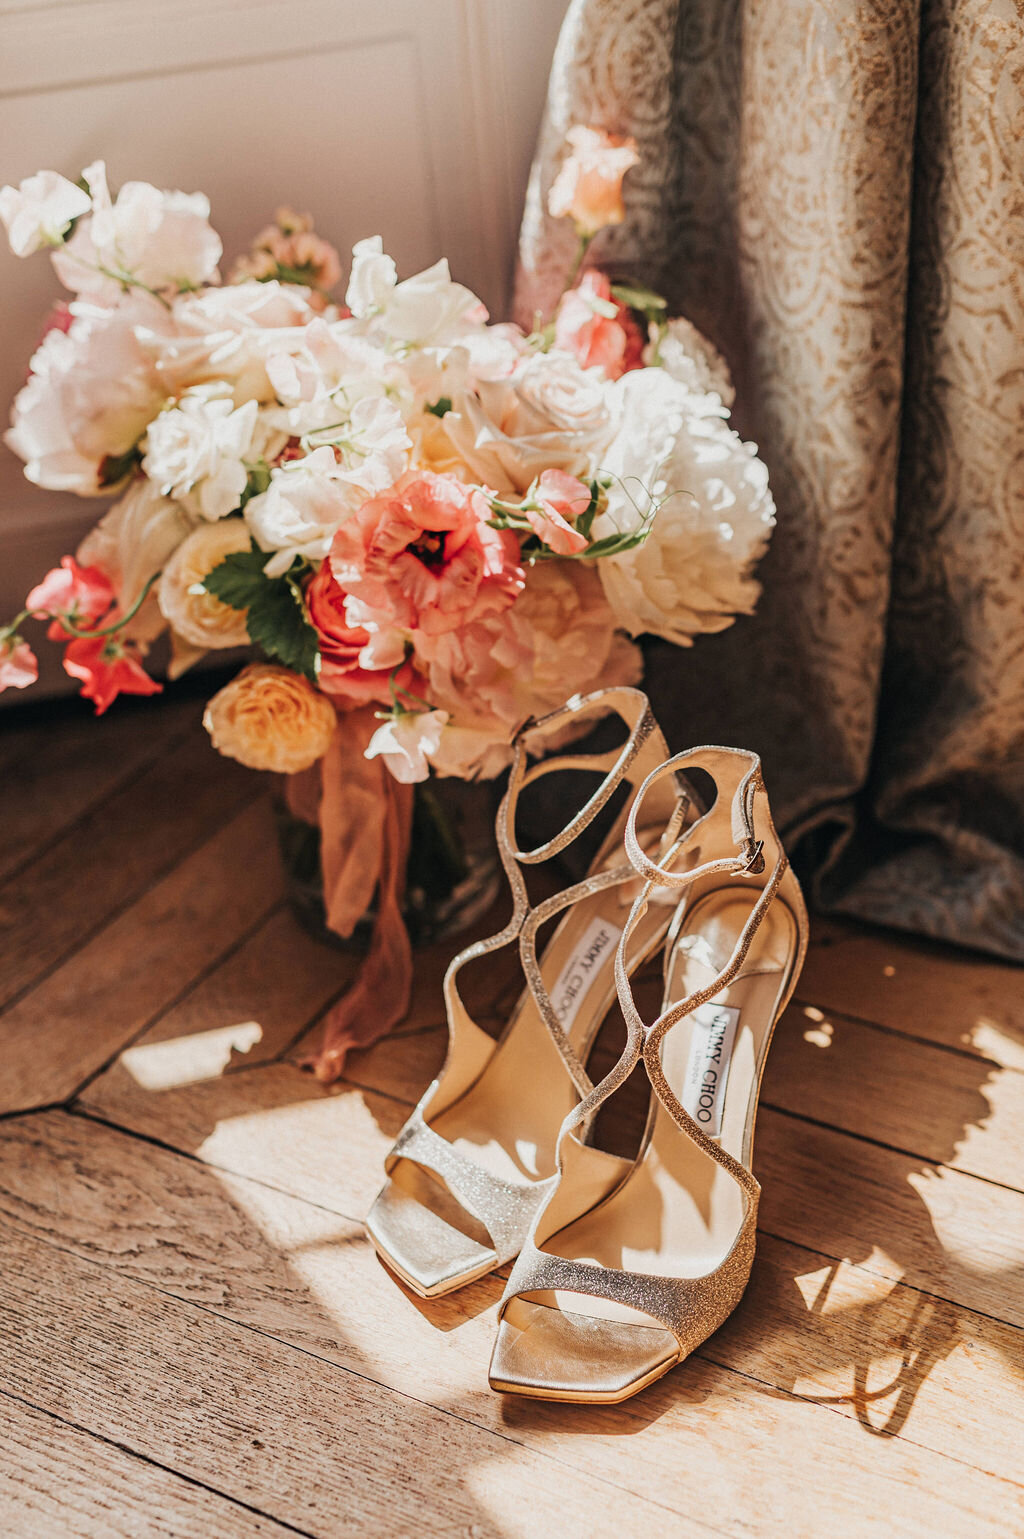 A romantic pastel-colored bouquet for this destination wedding in France